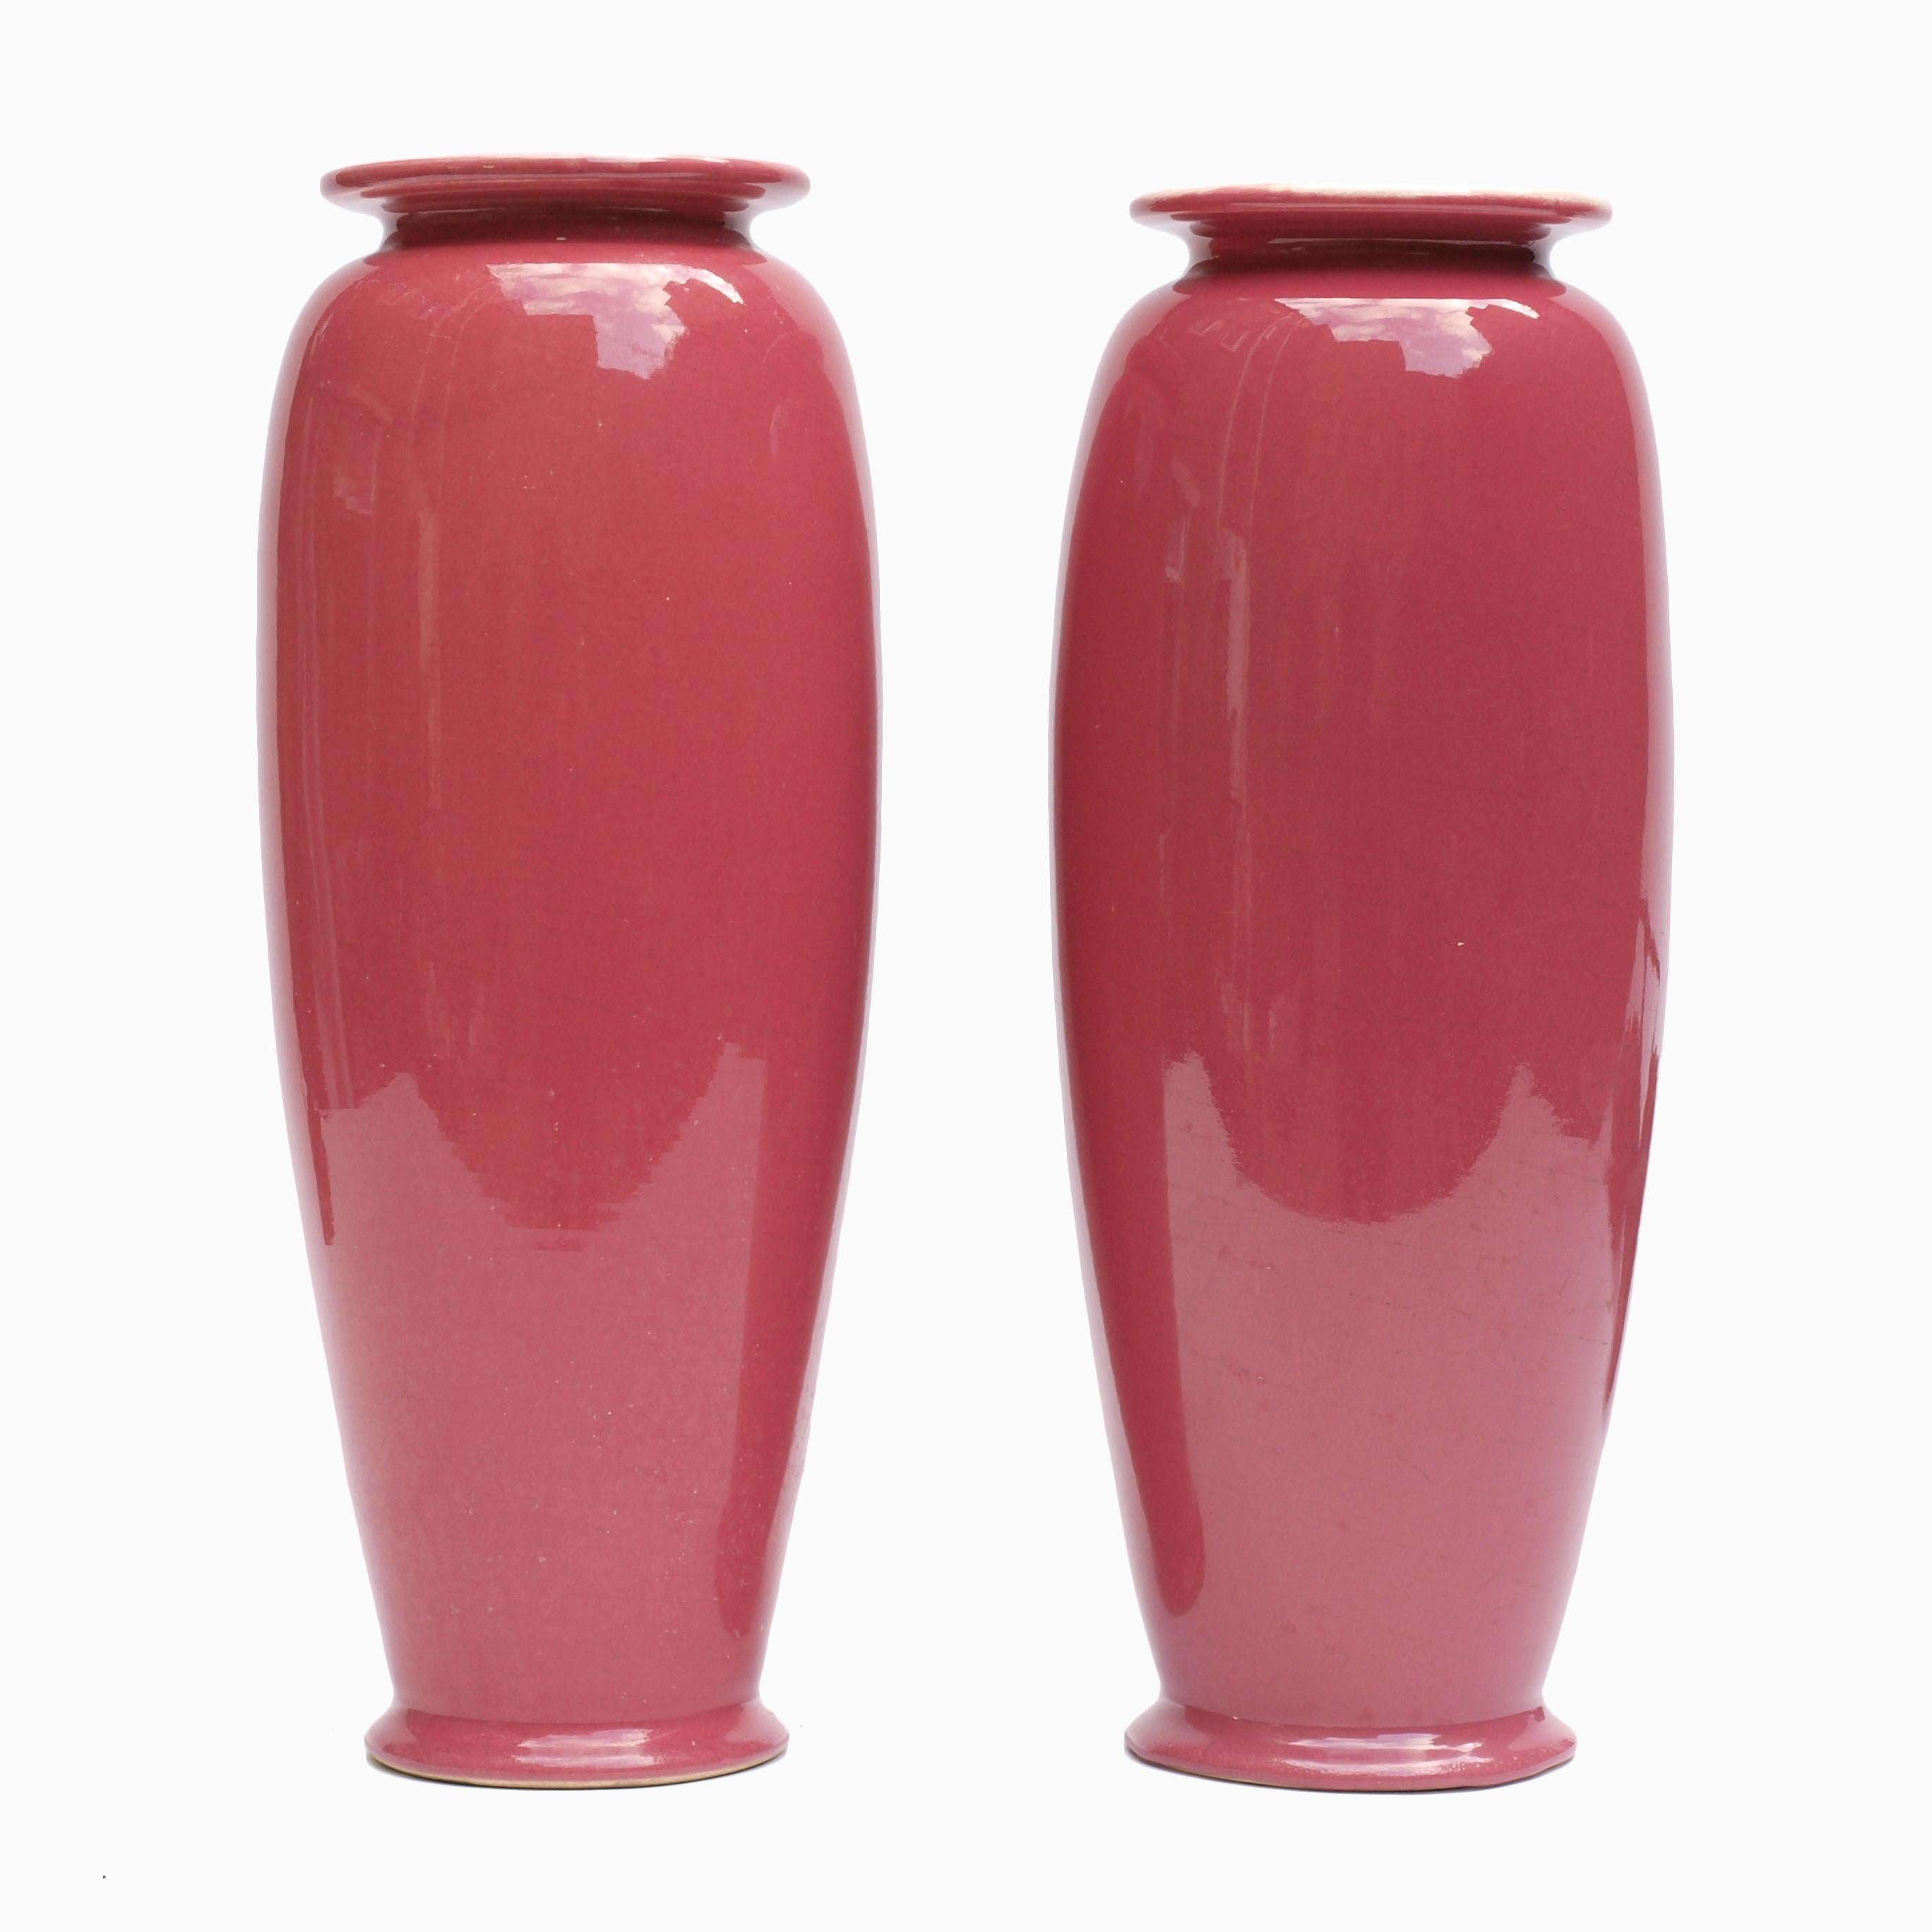 A beautiful pair of Christopher dresser urn shaped vases in a rich rose glaze with a cream interior. Ault pottery, owned by William Ault whom dresser designed for at the time would have produced these in the mid to late 1890s. Dresser’s clean shapes